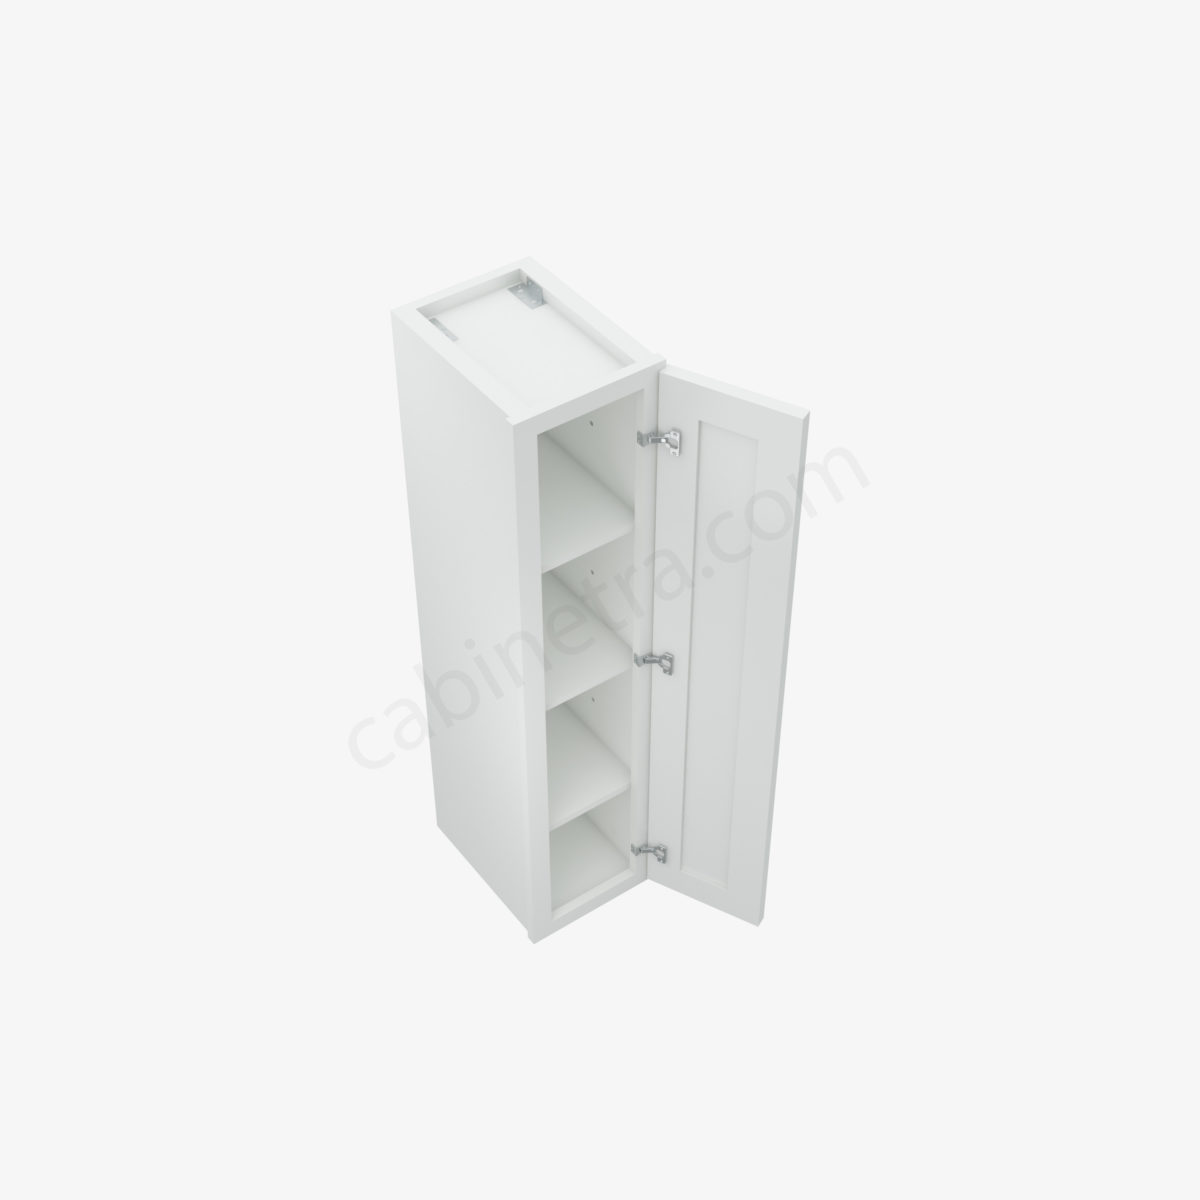 TW W0942 2 Forevermark Uptown White Cabinetra scaled